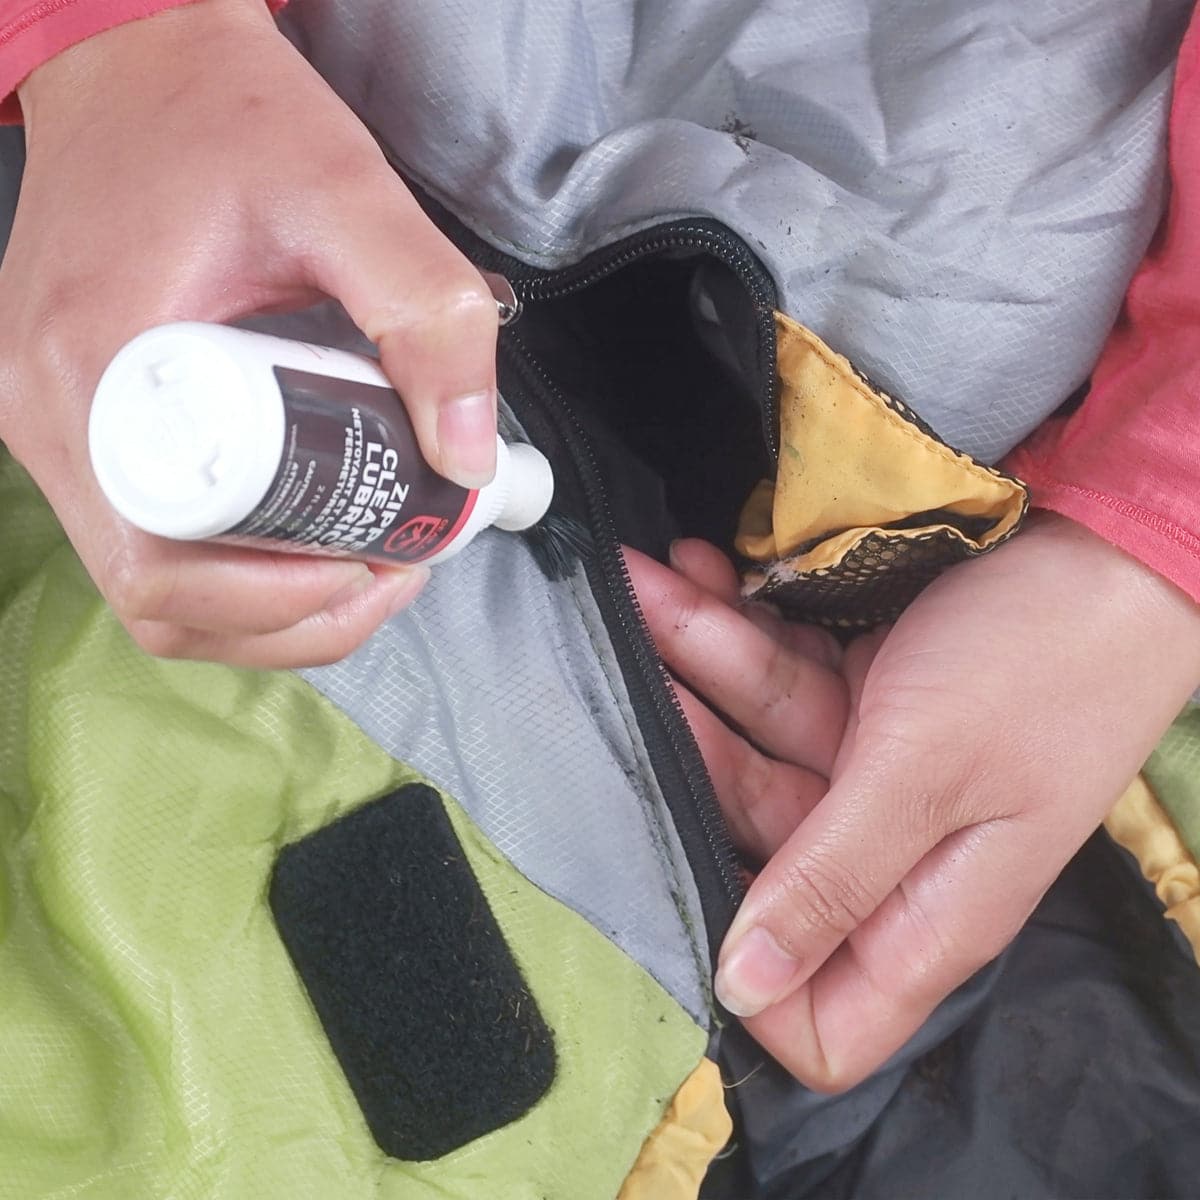 Featuring the Zipper Cleaner & Lubricant adhesive, glue, kayak care, kayak repair manufactured by NRS shown here from a third angle.